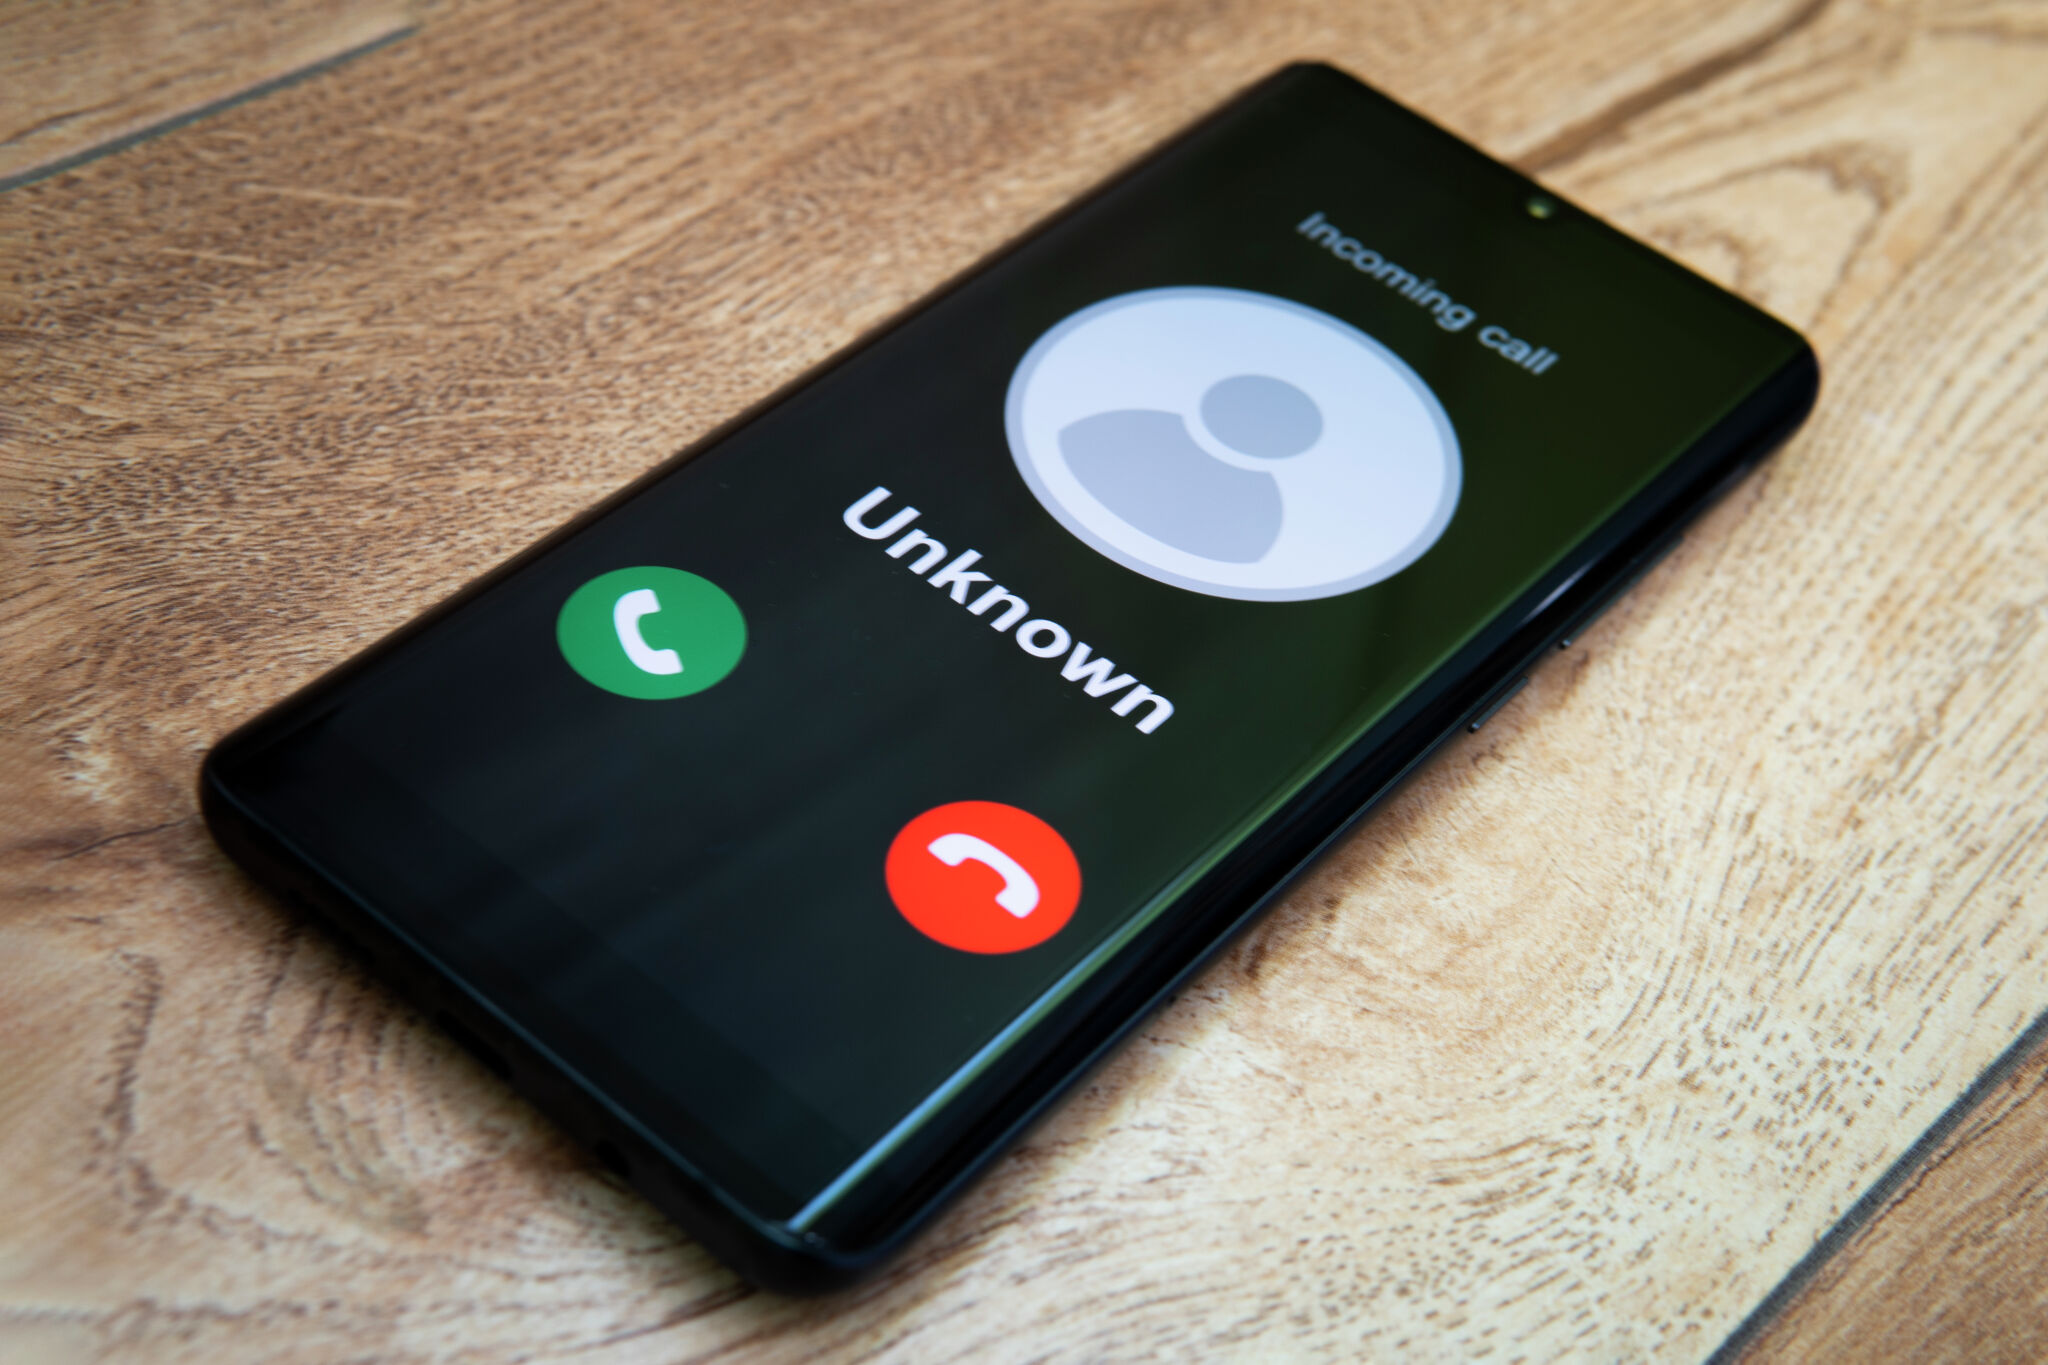 Texas man wins $75K after tracking down and suing telemarketers over illegal robocalls